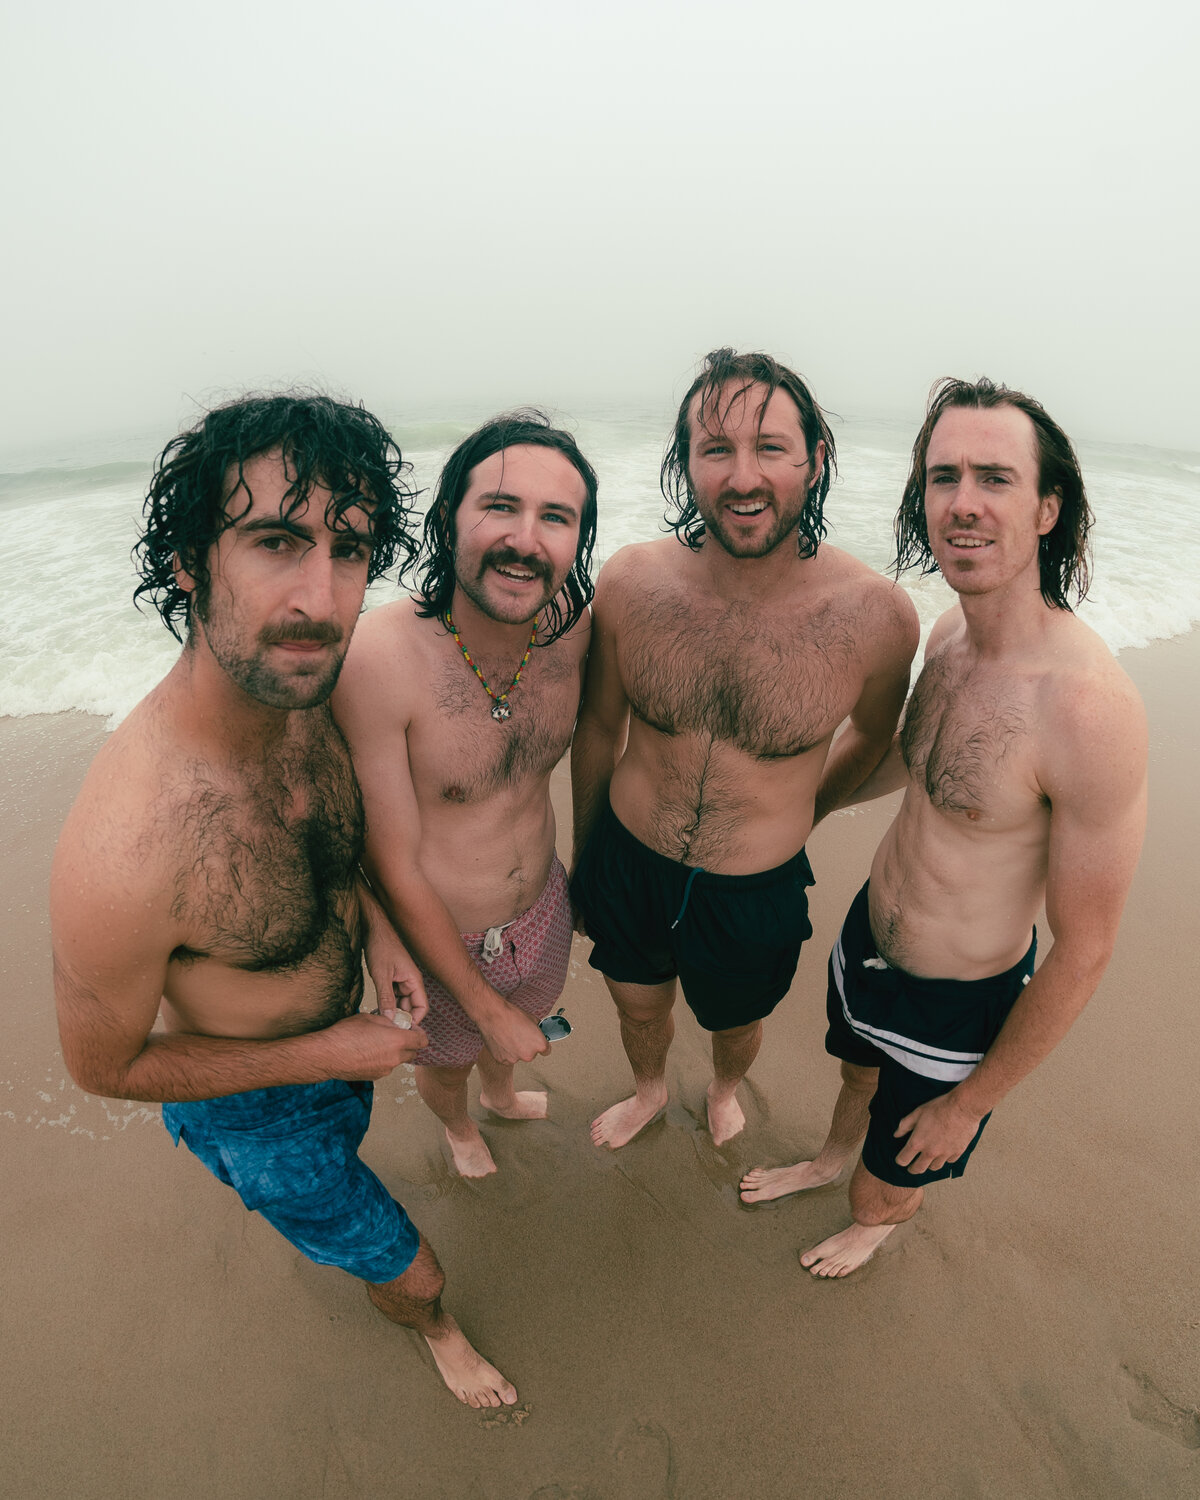 Band members do their best to get in some surfing when they play beach towns.